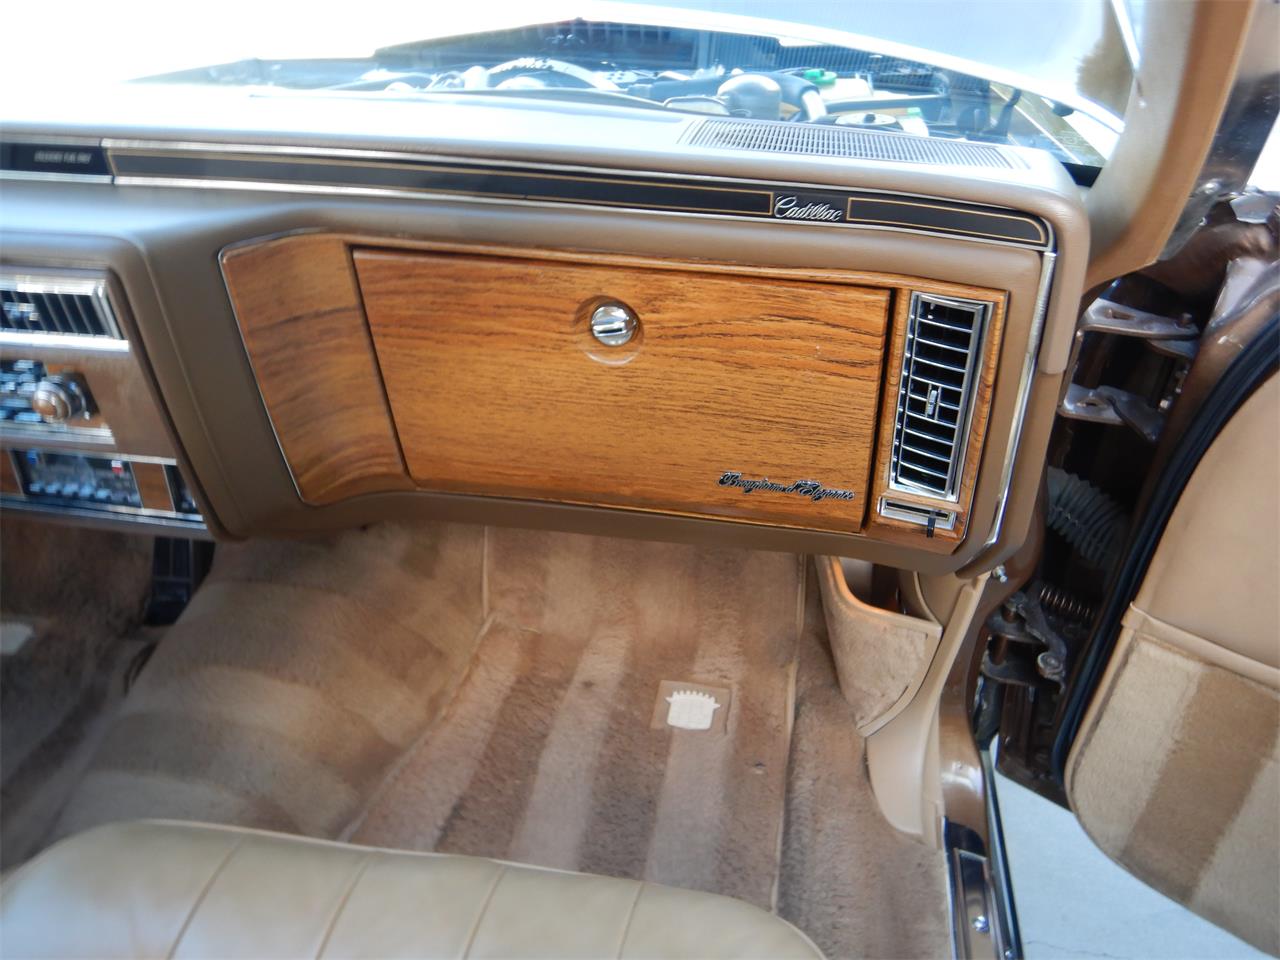 1981 Cadillac Fleetwood Brougham for sale in Woodland Hills, CA – photo 86